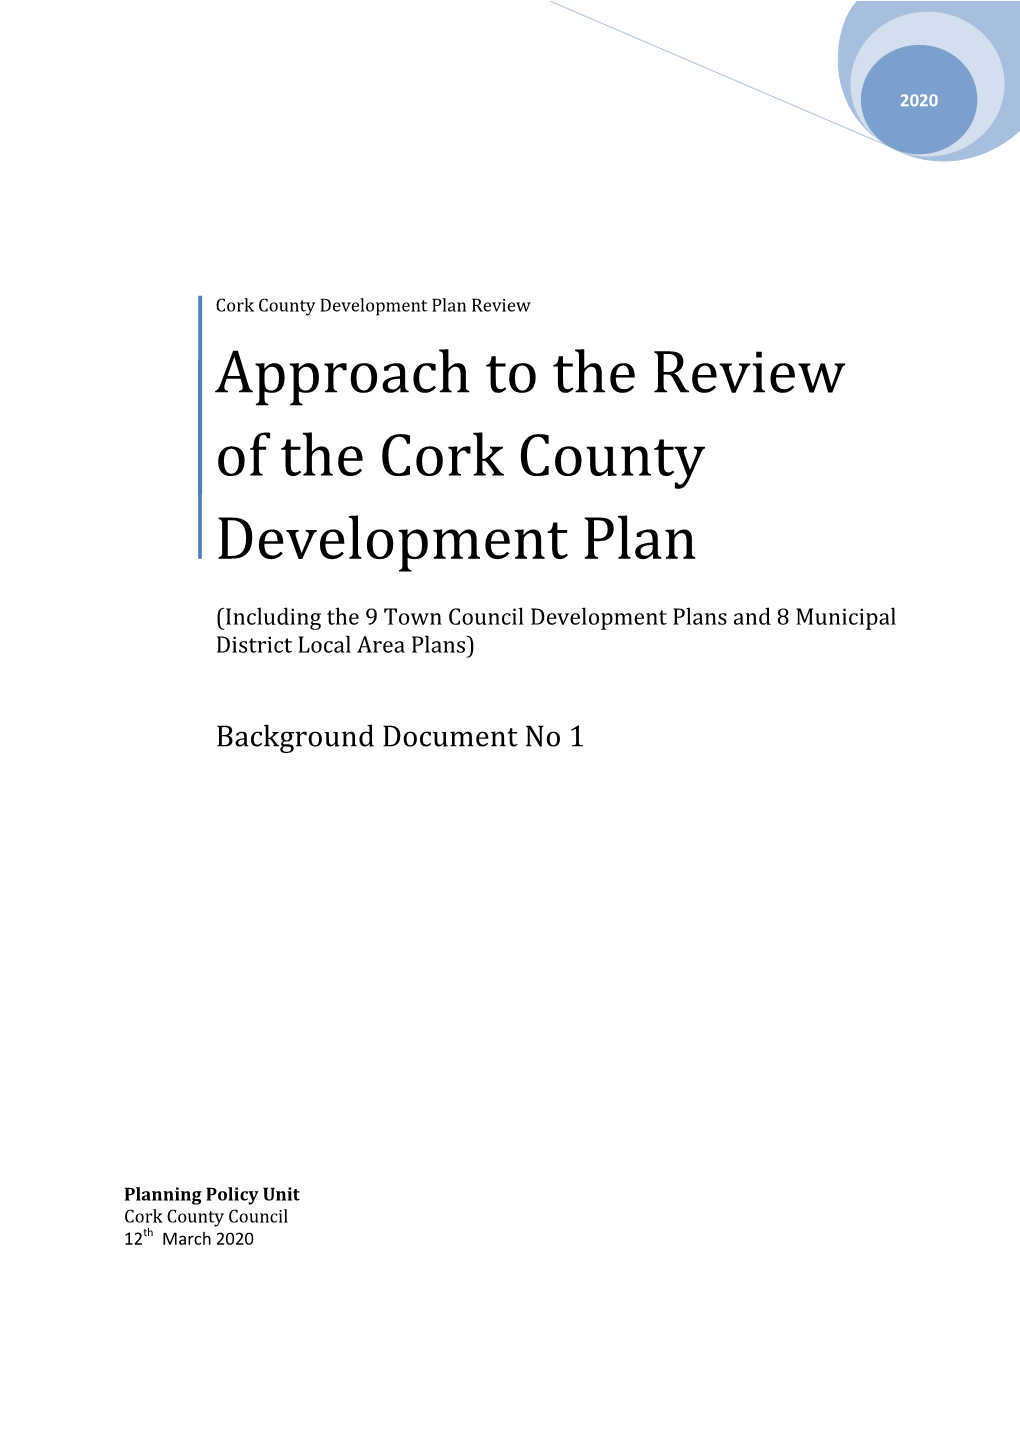 Approach to the Review of the Cork County Development Plan